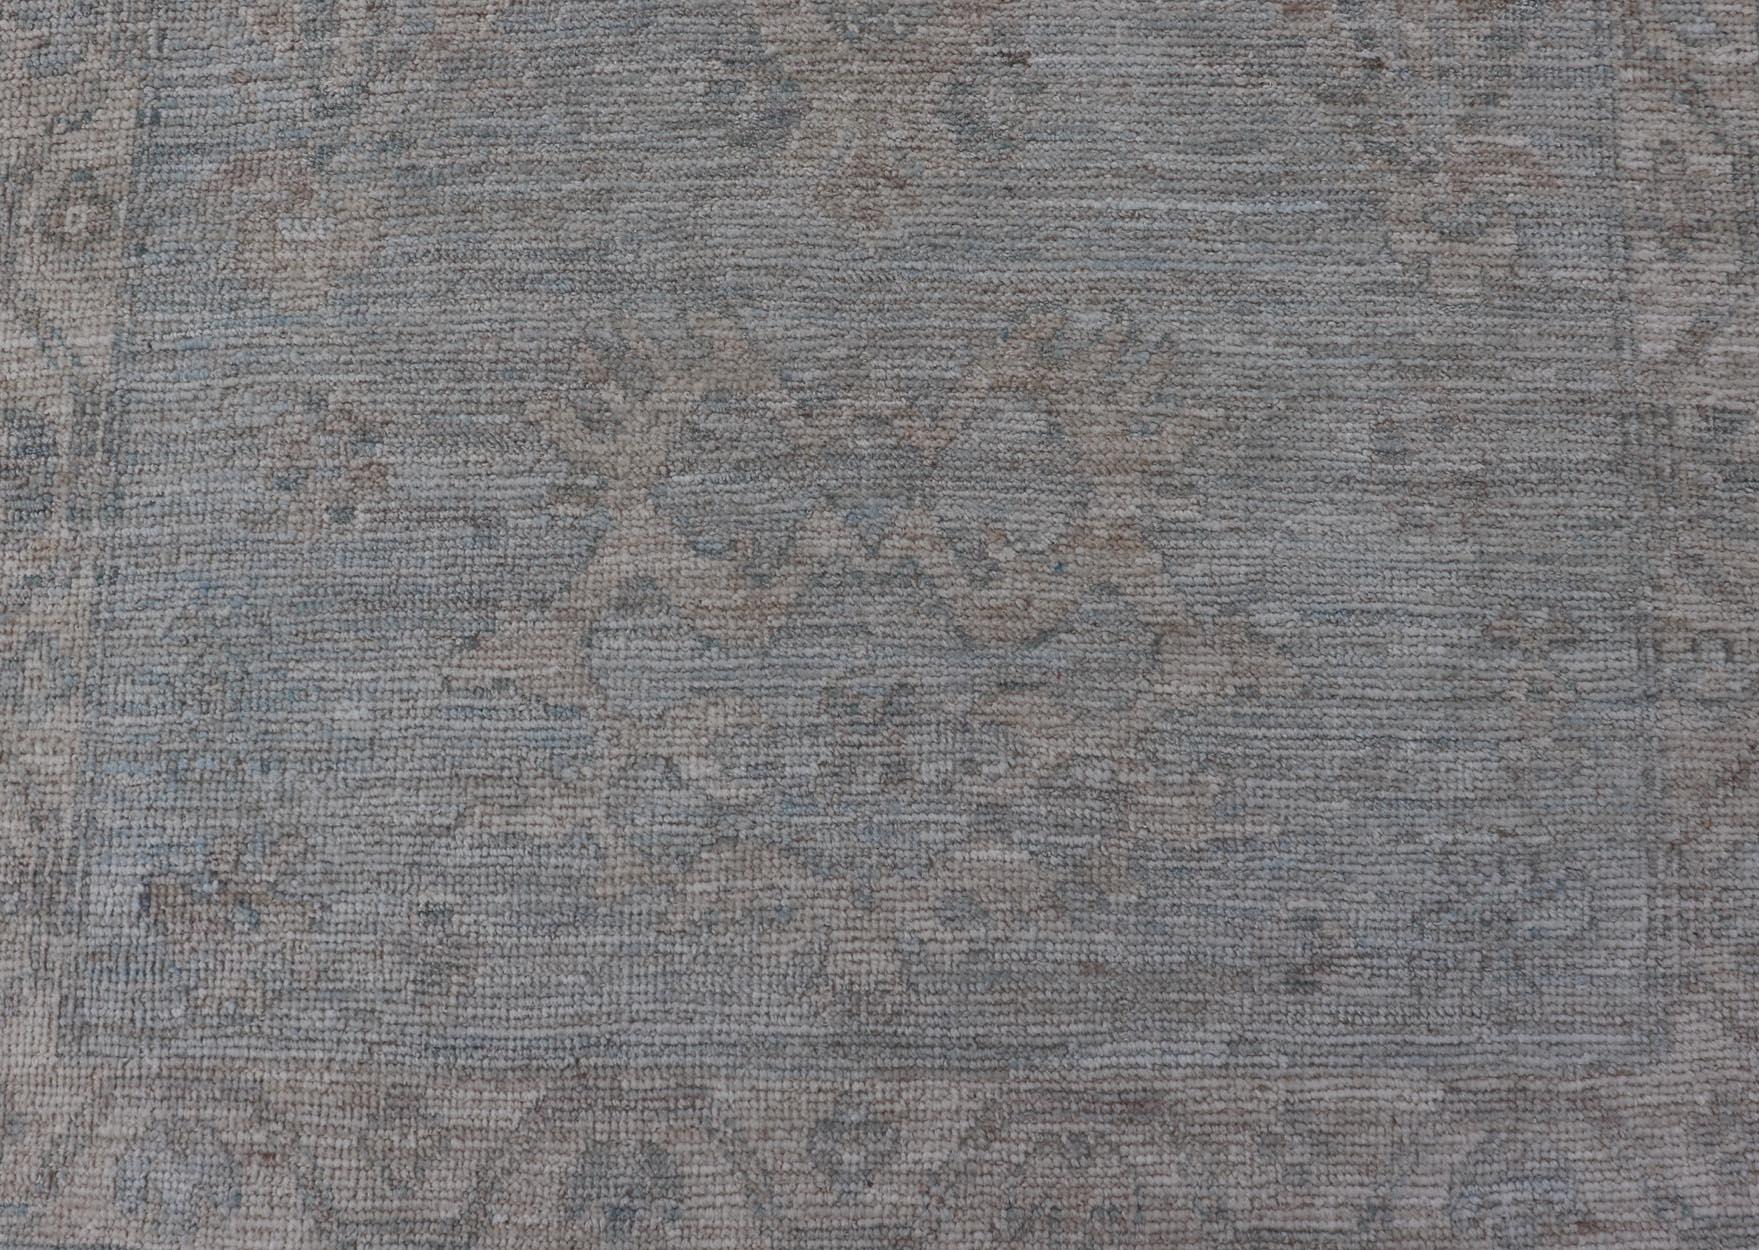 Modern Oushak Rug in All-Over Floral Motifs in Light Blue-Gray and Creams. Keivan Woven Arts; rug AWR-16788 Country of Origin: Afghanistan Type: Oushak Design: All-Over, Floral. 
Measures: 2'11 x 5'3 
hand knotted in wool, this rustic looking